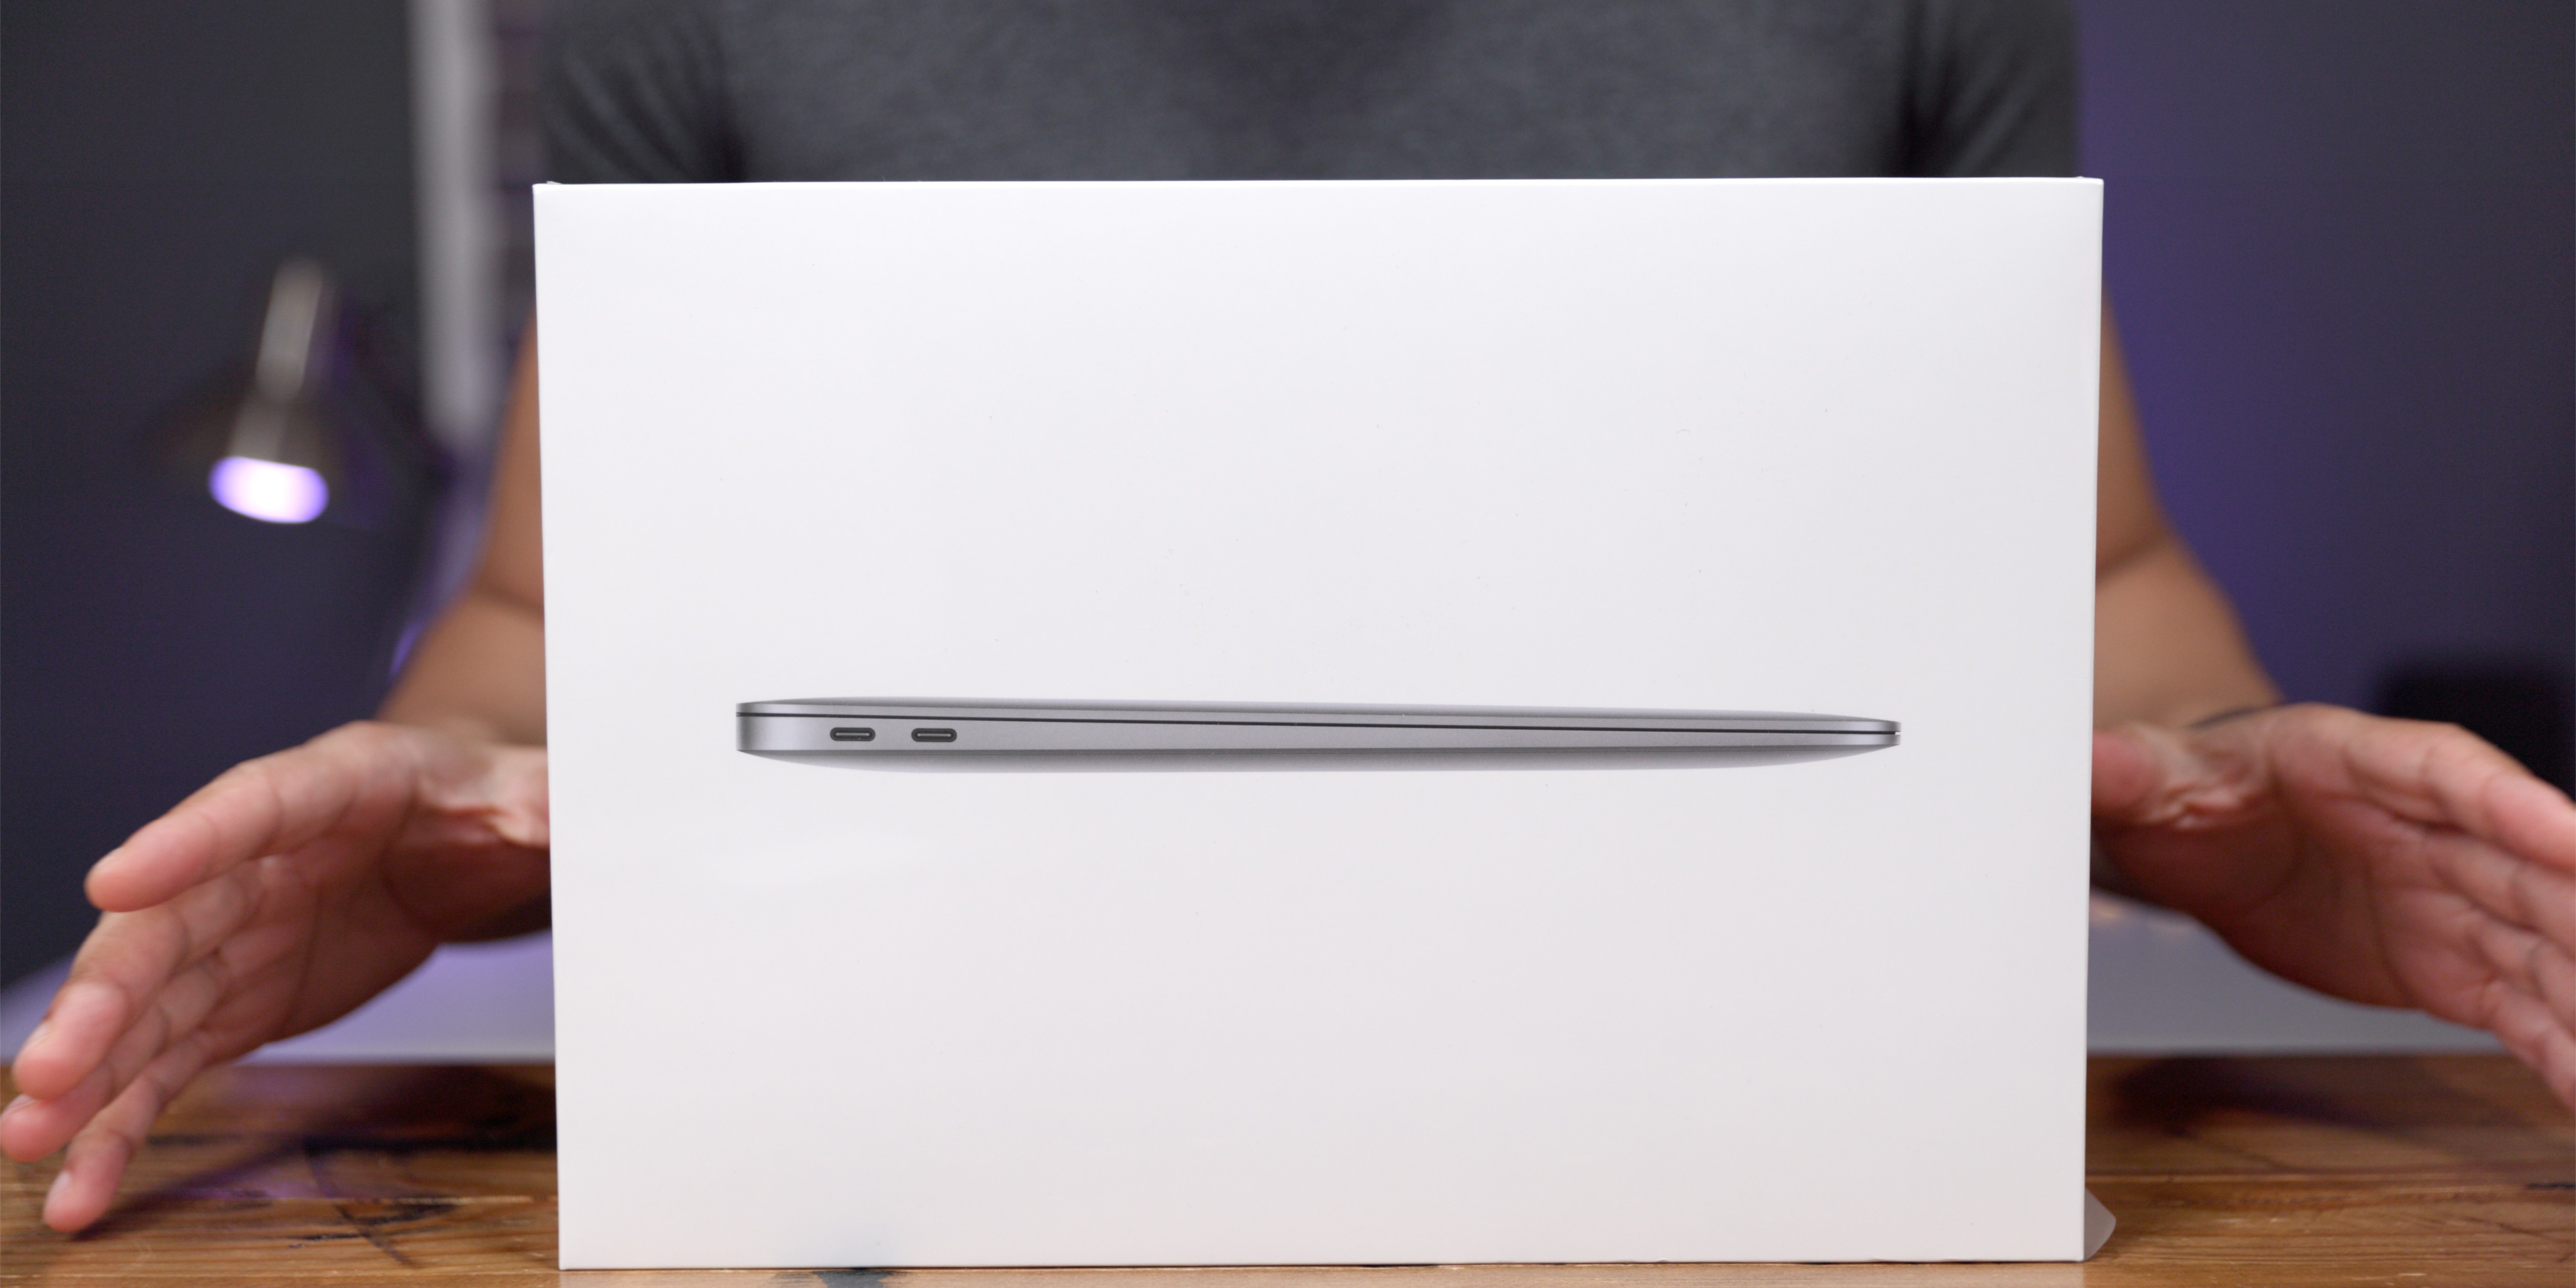 The 9to5Mac Apple Product of the Year: The M1 MacBook Air, Mac